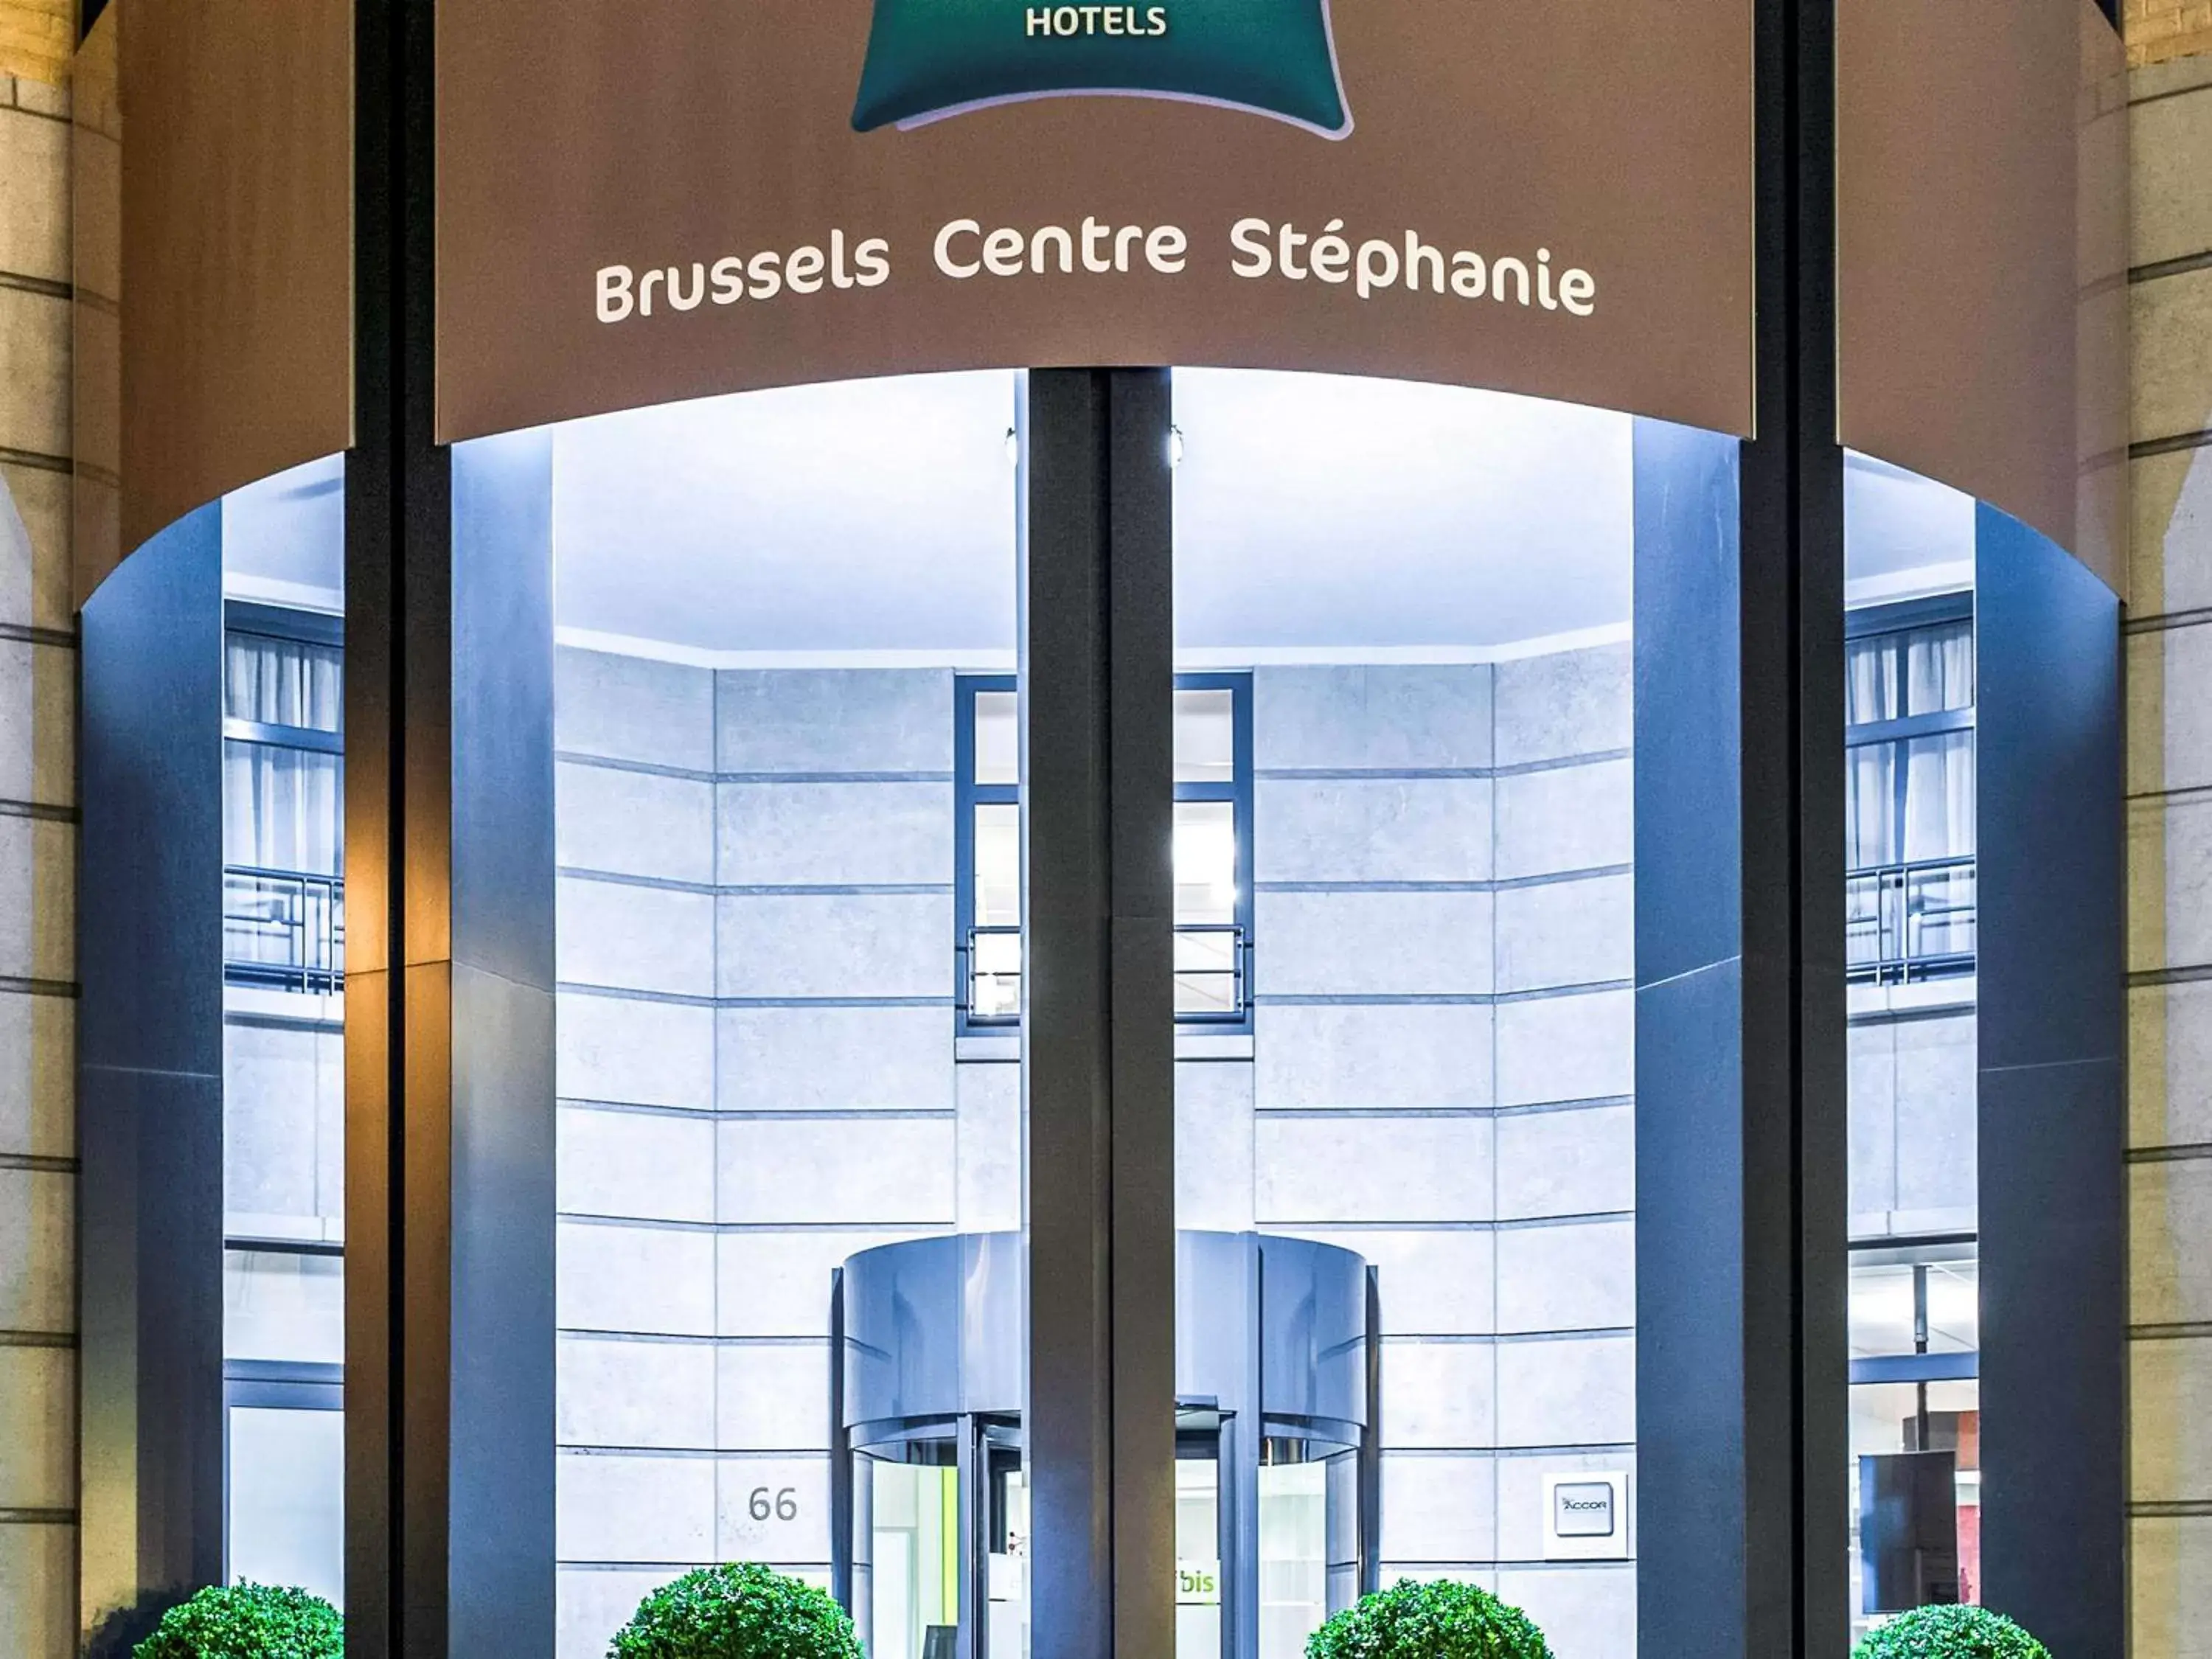 Property Building in ibis Styles Hotel Brussels Centre Stéphanie